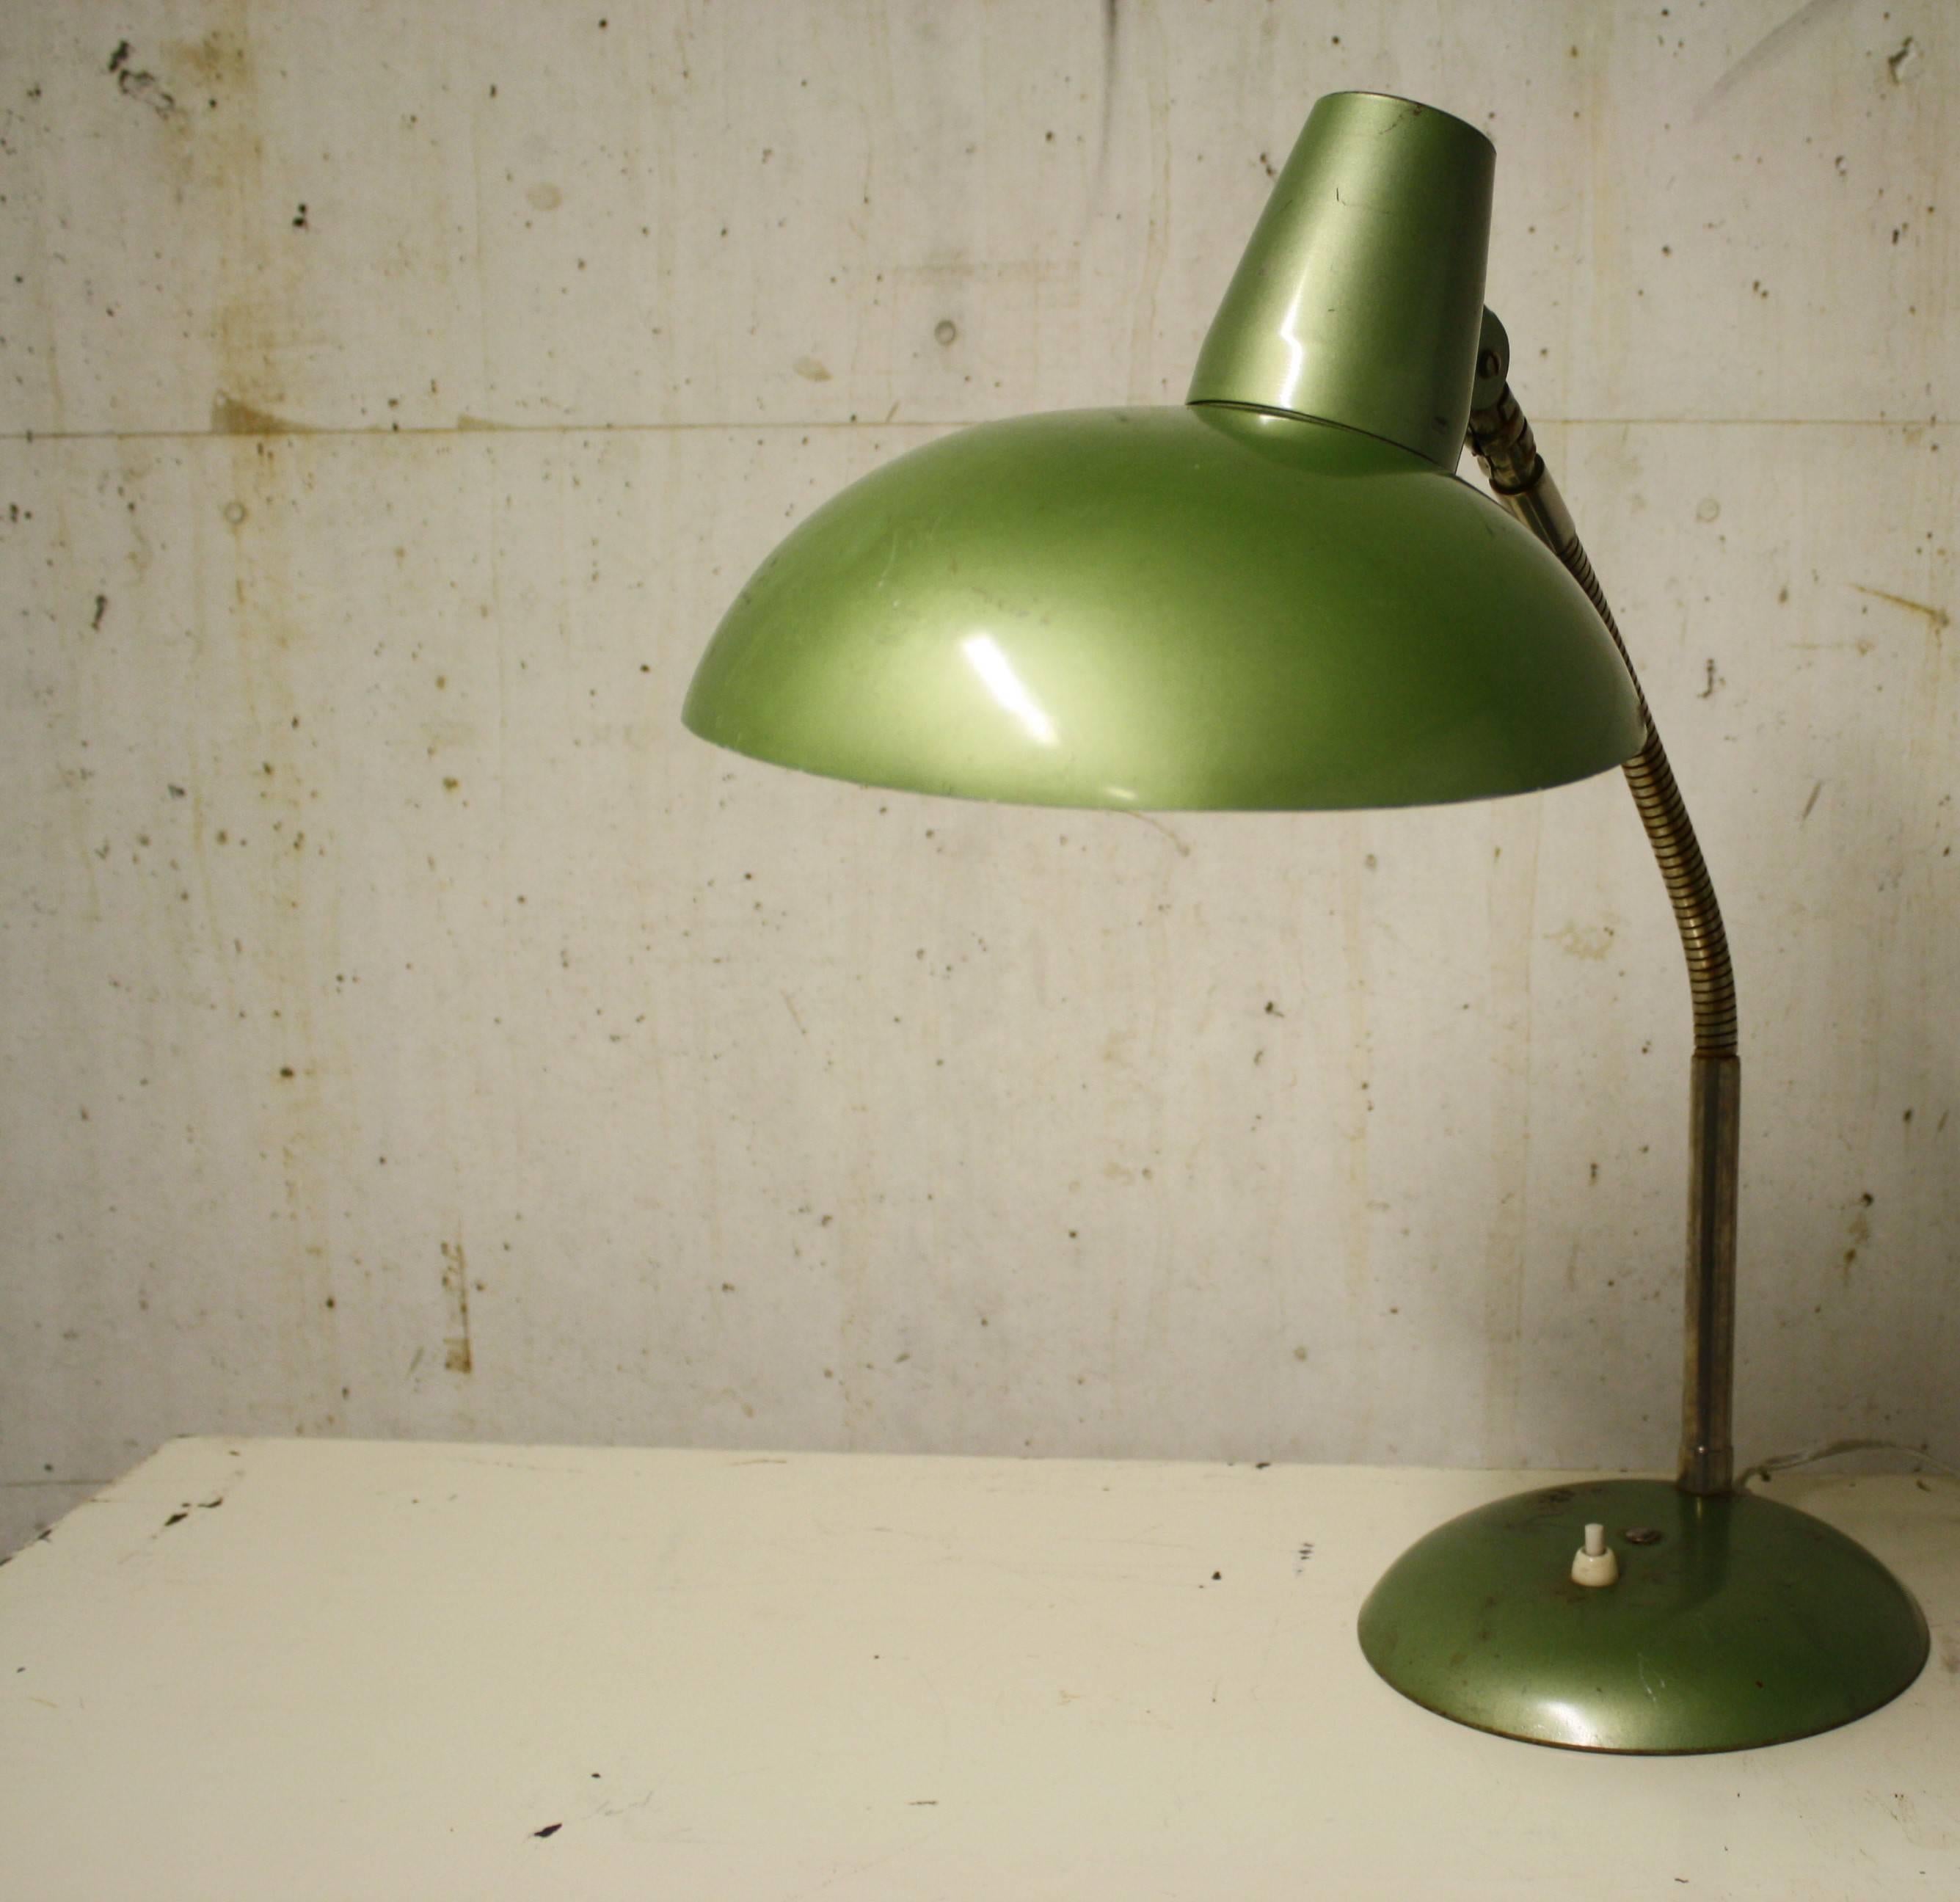 Green Bauhaus desk lamp - Industrial desk lamp

This 1930s table lamp has a rather unusual green colour which is both charming an easy to place in your interior.

It is articulated and can be adjusted easily to fit your needs.

Good condition,